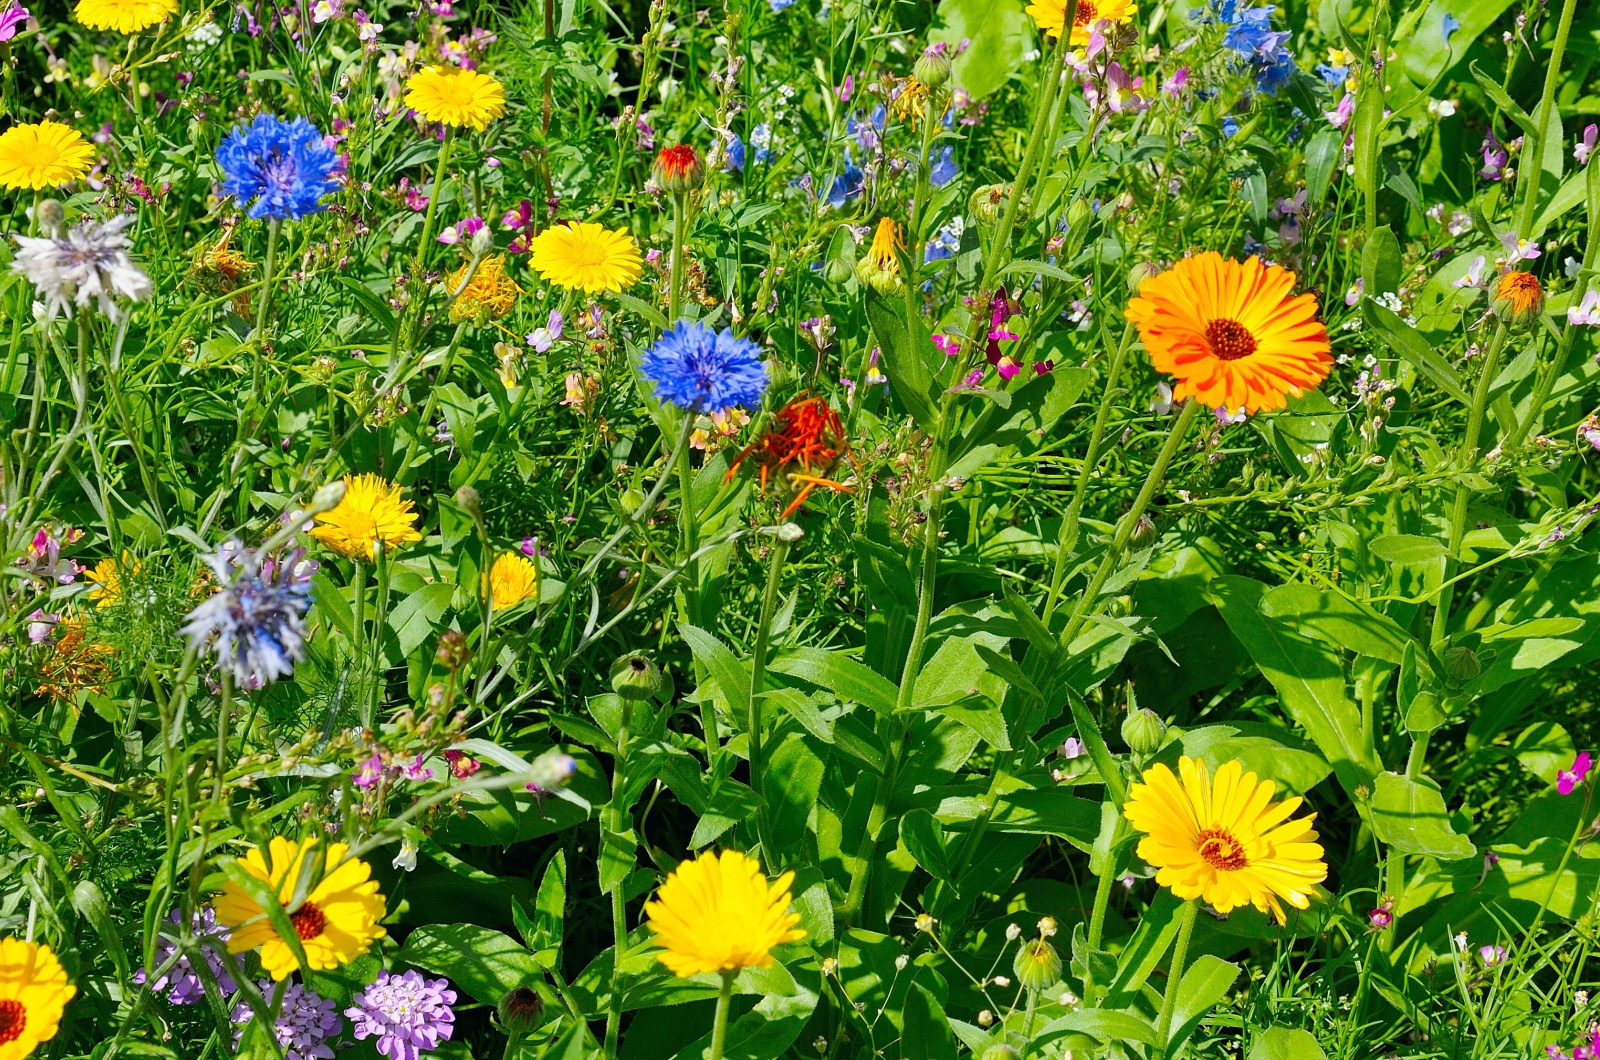 marigolds, cornflowers and other wildflowers